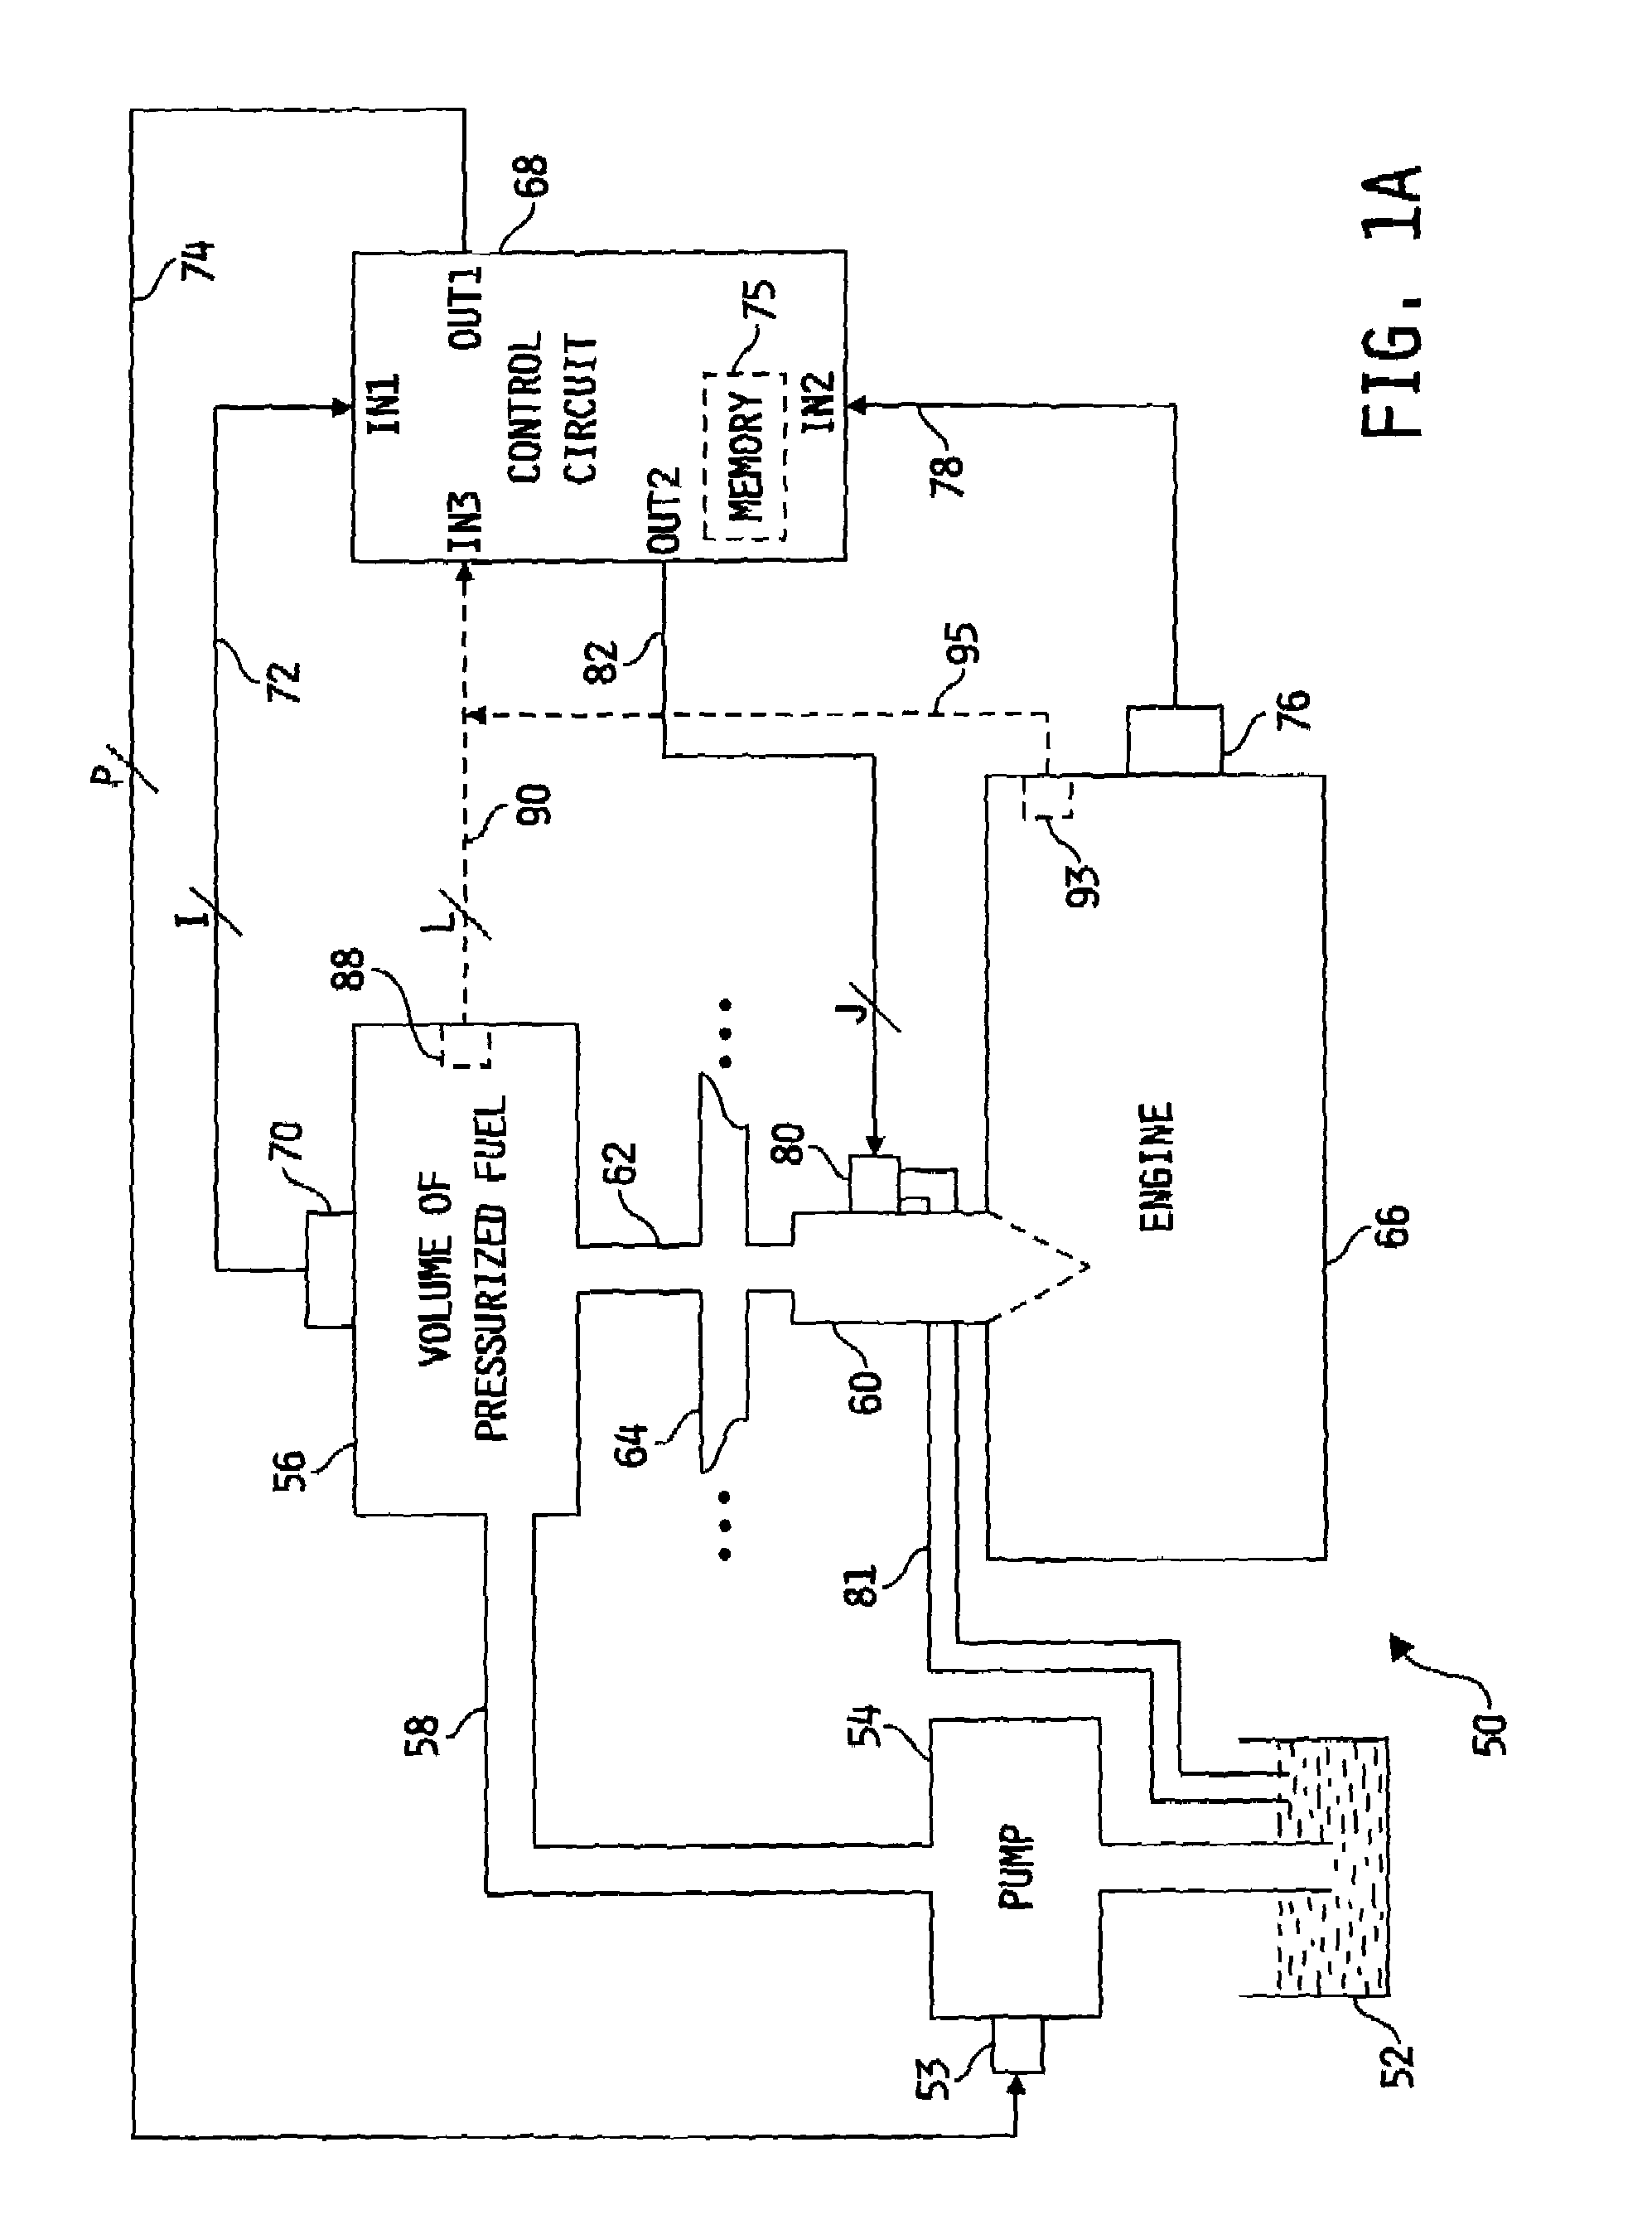 System for estimating a quantity of parasitic leakage from a fuel injection system